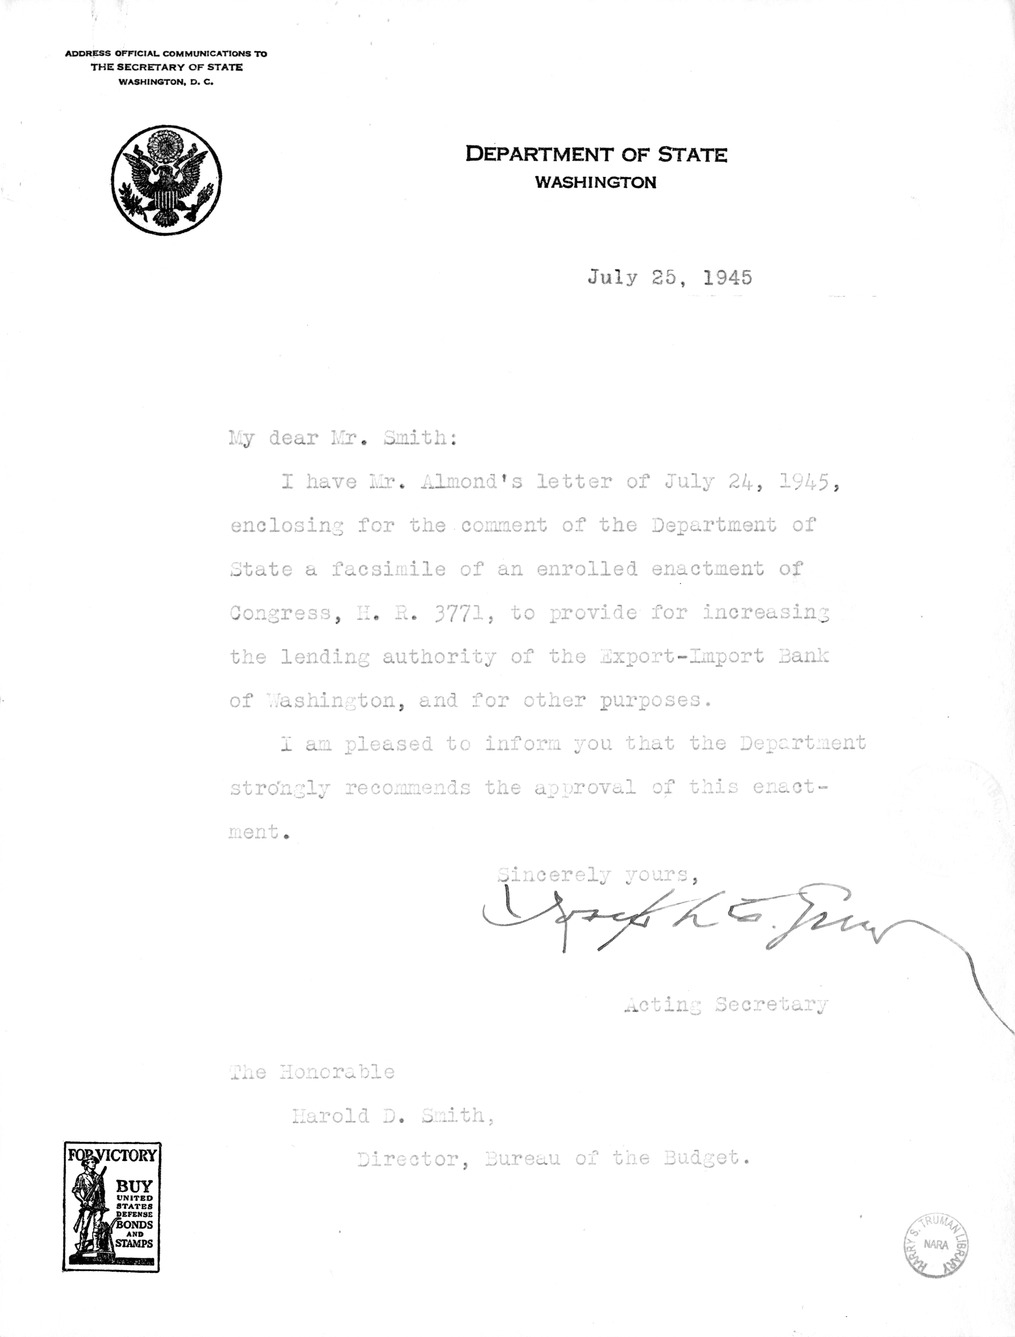 Memorandum from Harold D. Smith to M. C. Latta, H.R. 3771, To Provide for Increasing the Lending Authority of the Export-Import Bank of Washington, with Attachments